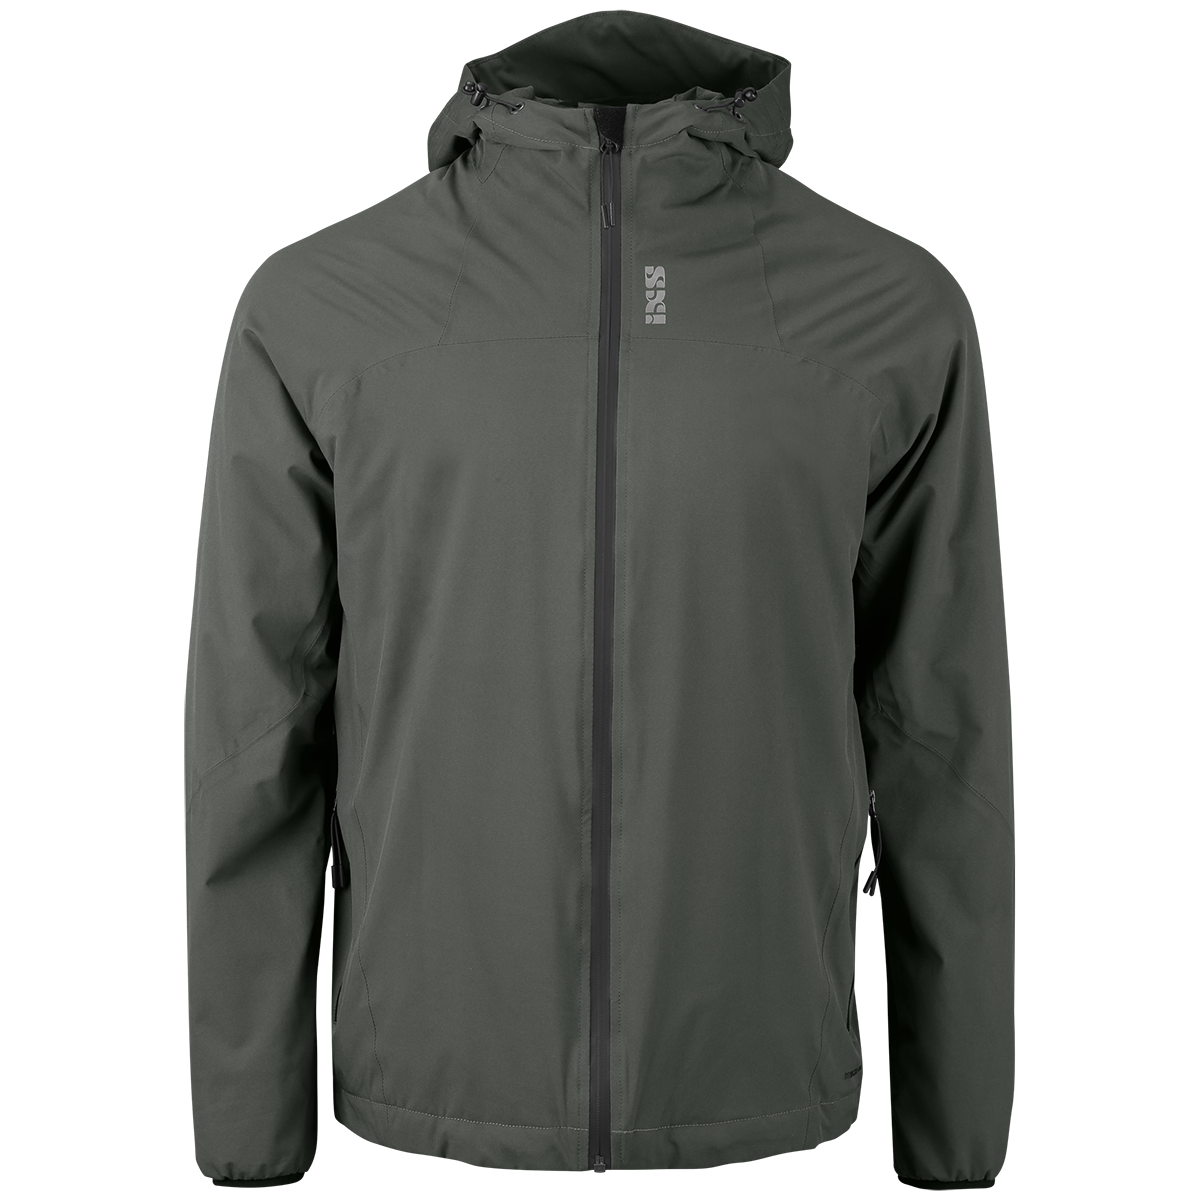 Carve Zero insulated AW jacket anthracite | All-weather | MTB Apparel ...